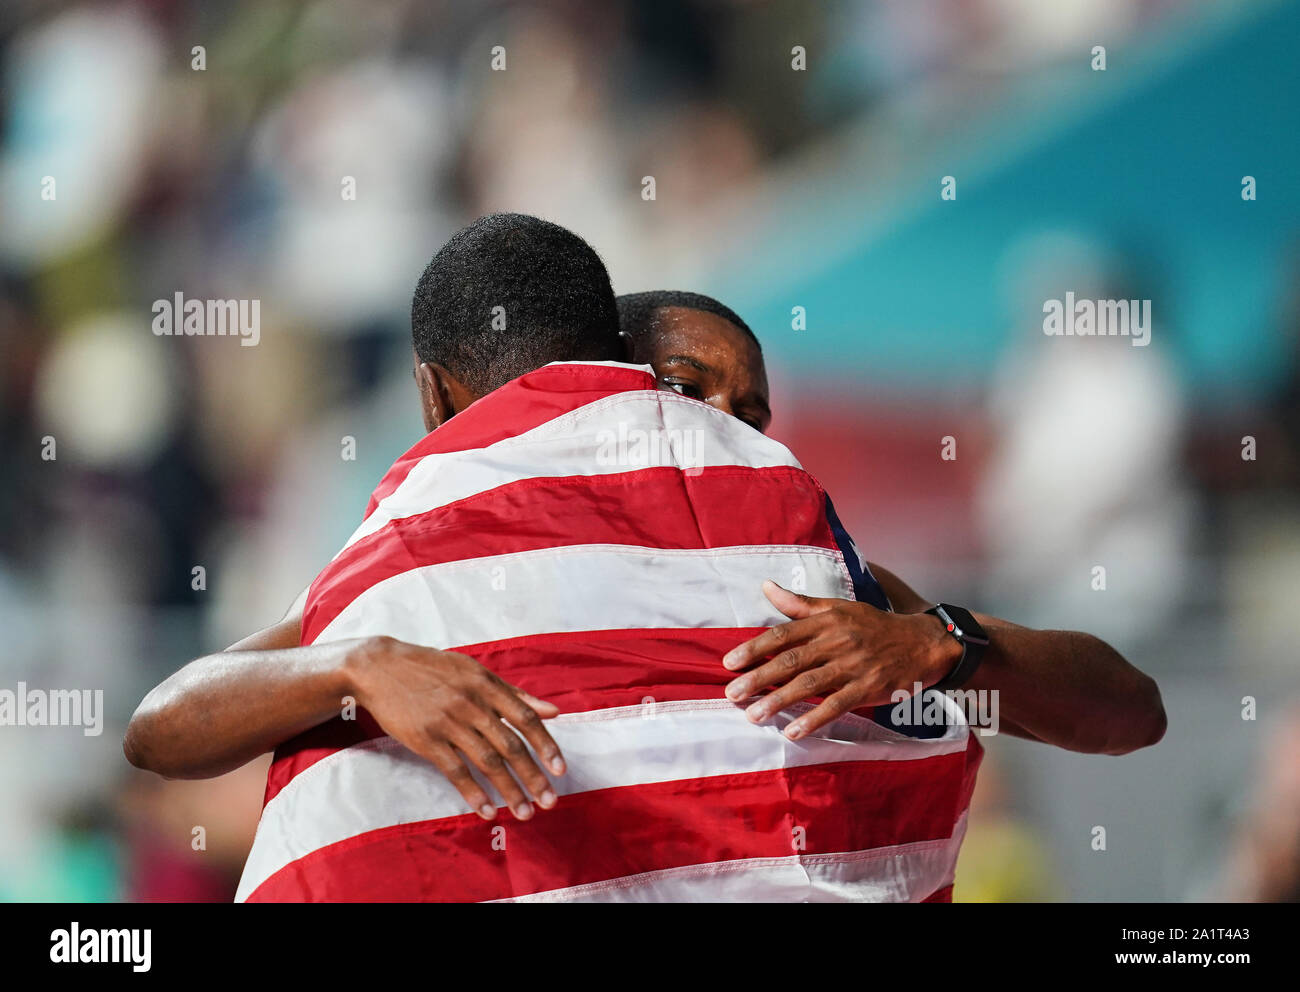 Doha, Qatar. 28th Sep, 2019. Christian Coleman of United States and Justin Gatlin of United States in the 100 meter for men during the 17th IAAF World Athletics Championships at the Khalifa Stadium in Doha, Qatar. Ulrik Pedersen/CSM/Alamy Live News Stock Photo